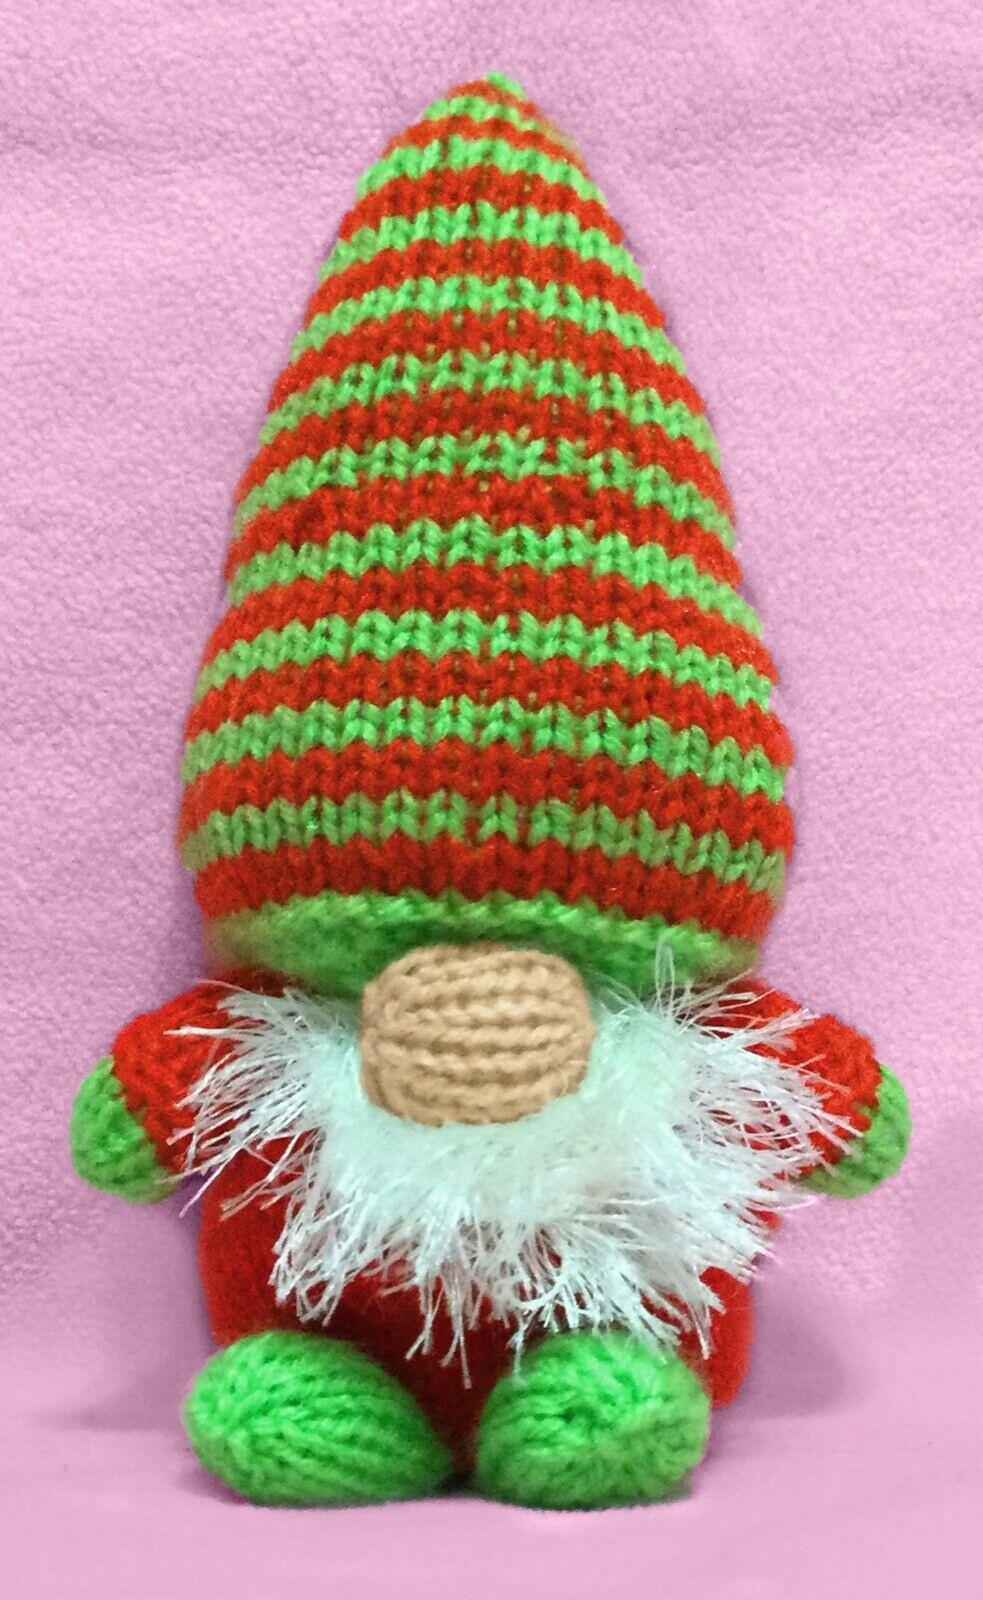 Russian Doll chocolate orange cover 13 cms Toy KNITTING PATTERN